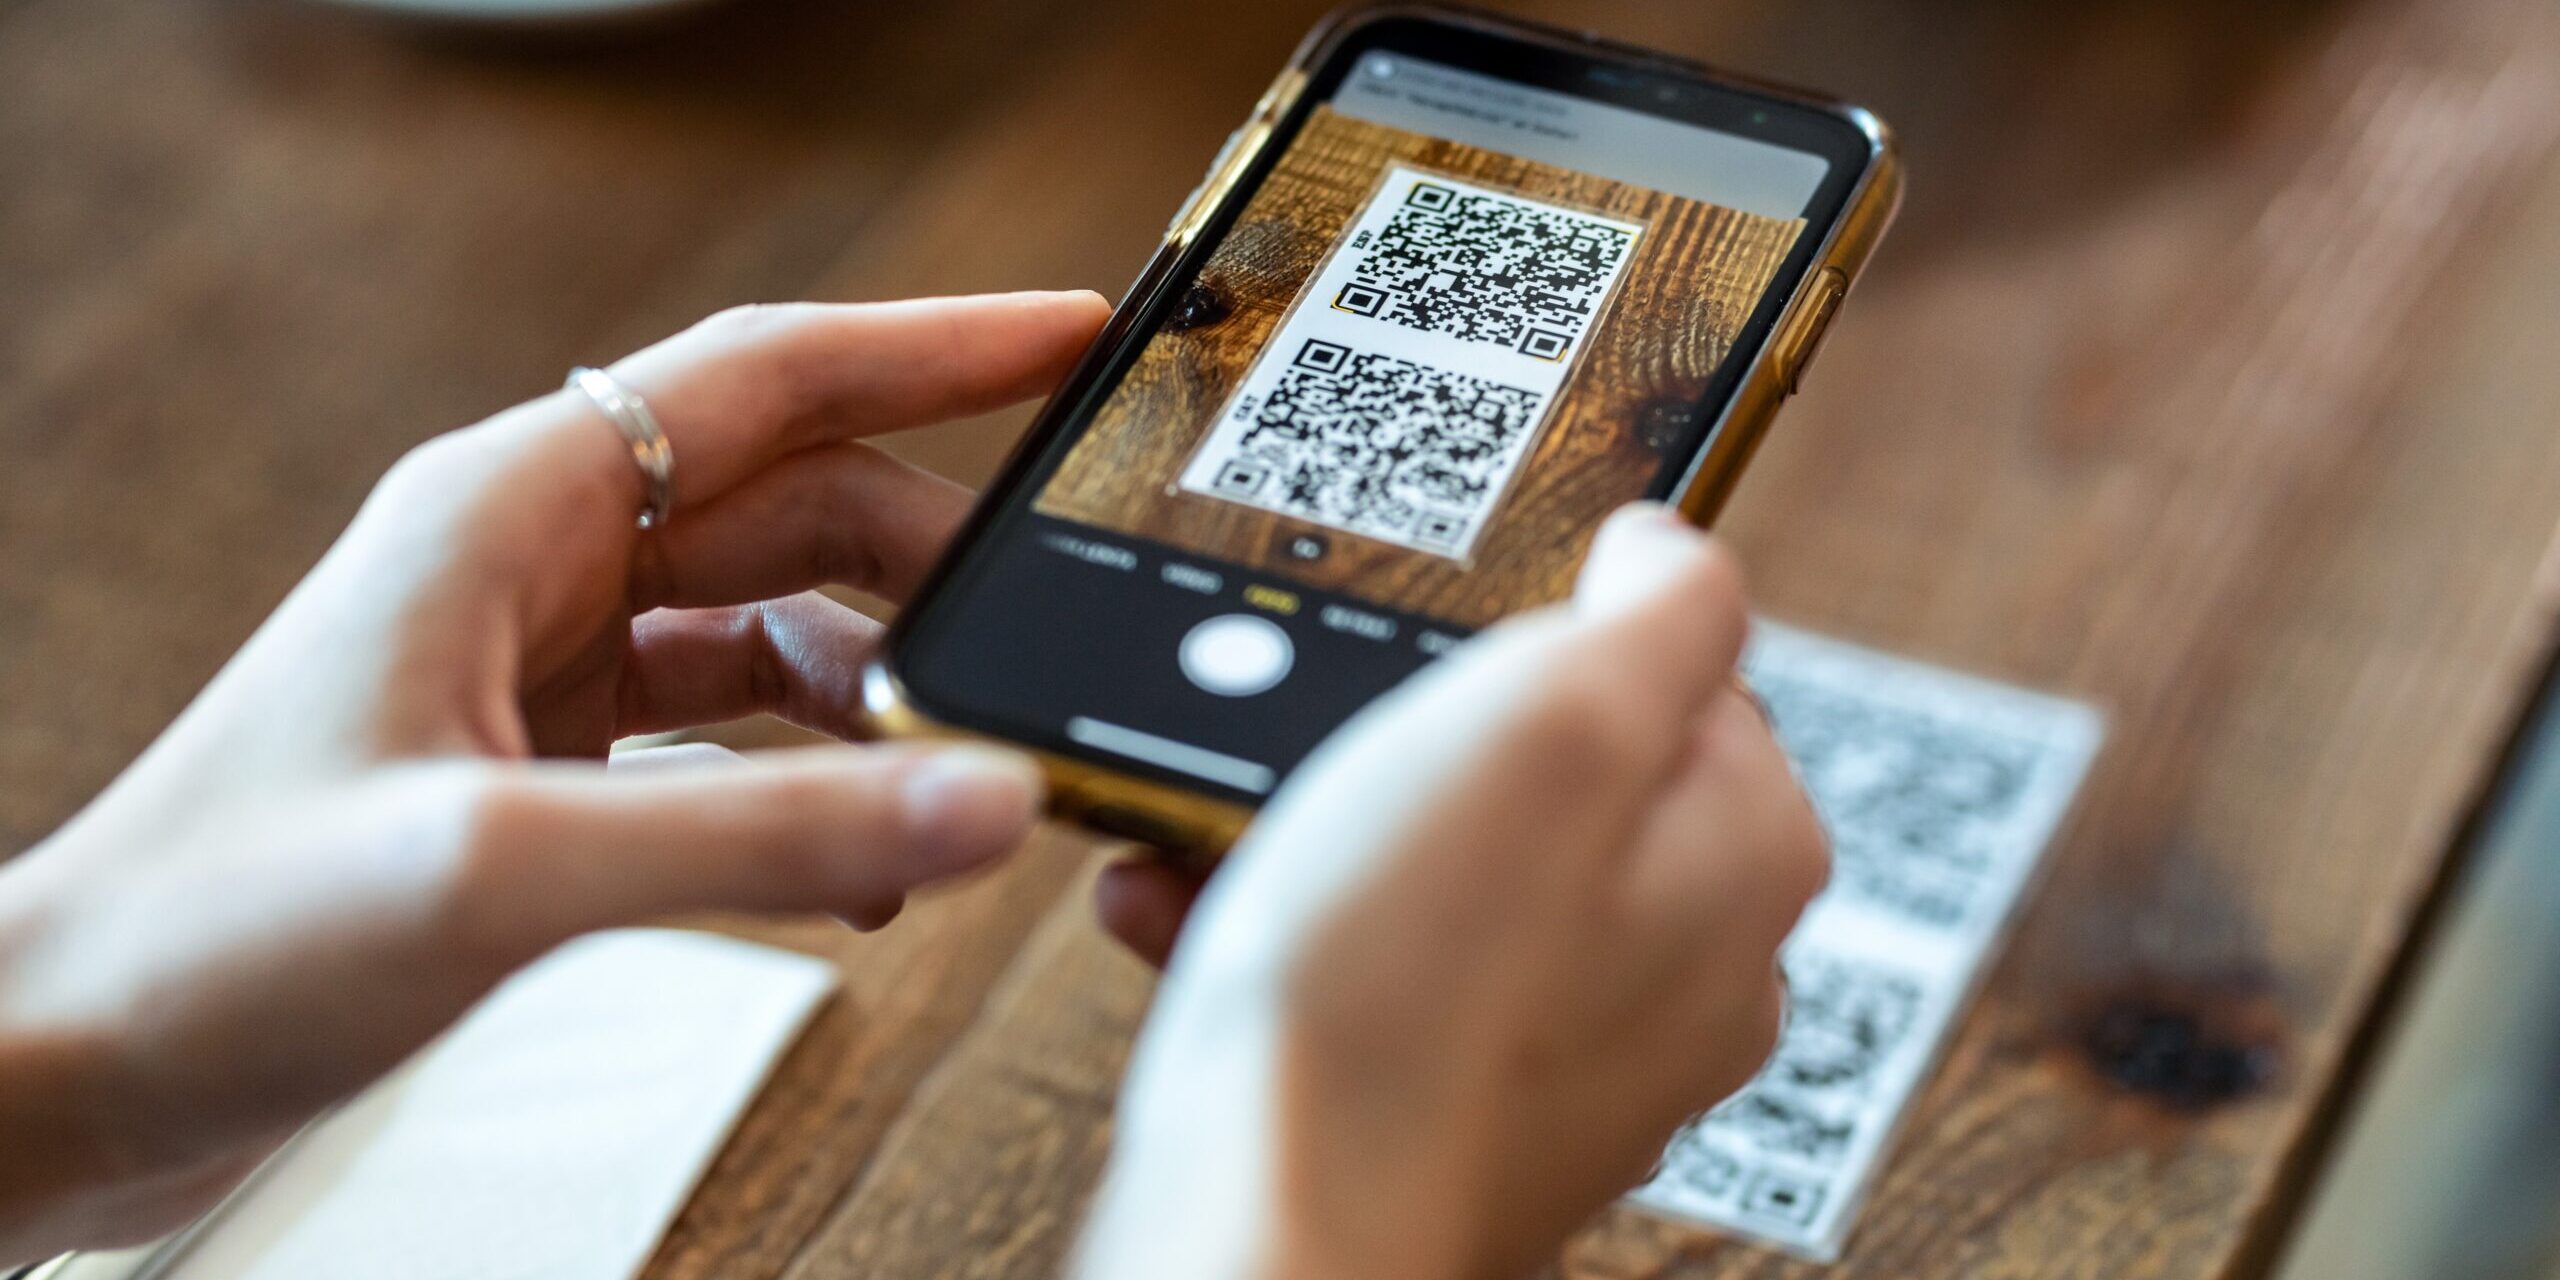 Contactless payments can be completed on a customer’s phone with the addition of a QR code at the table.